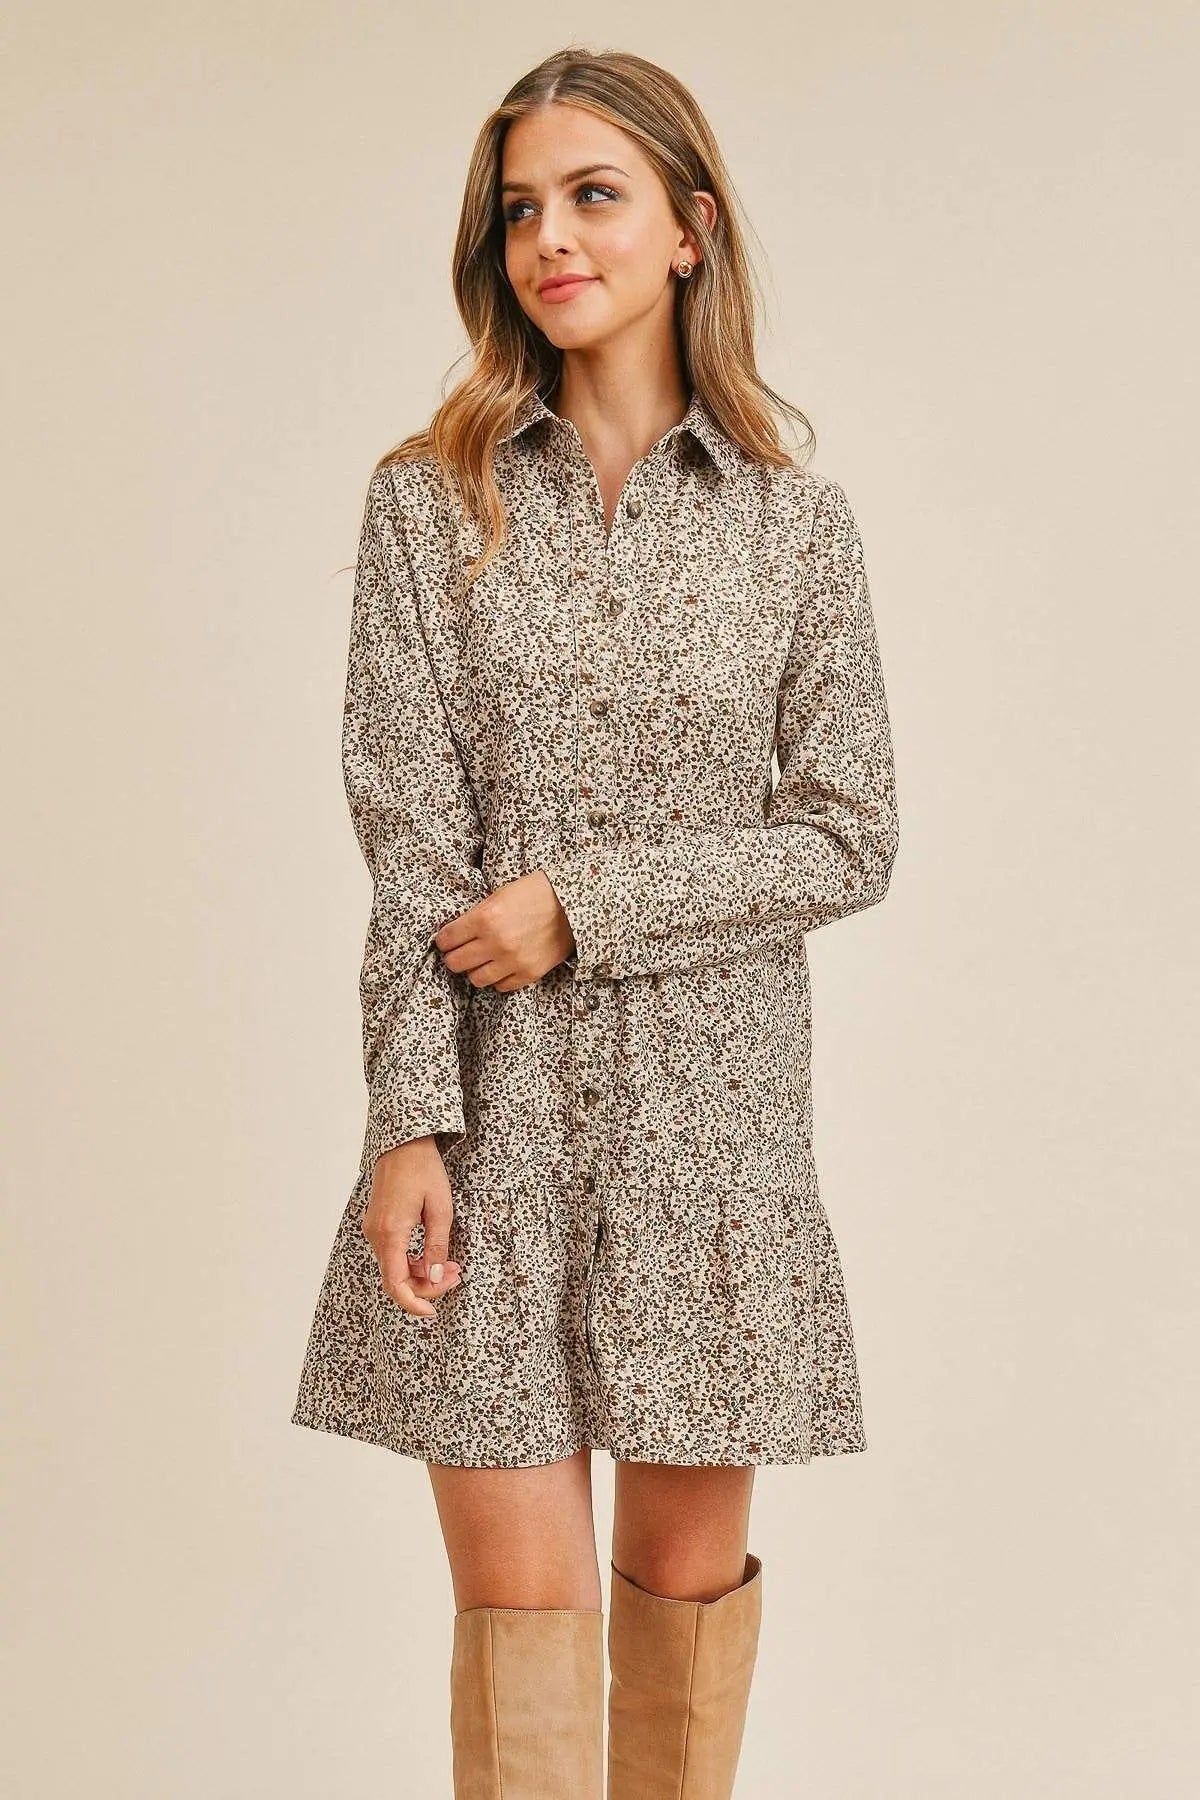 Corduroy Printed Button Down Front Collar Long Sleeve Dress Sunny EvE Fashion